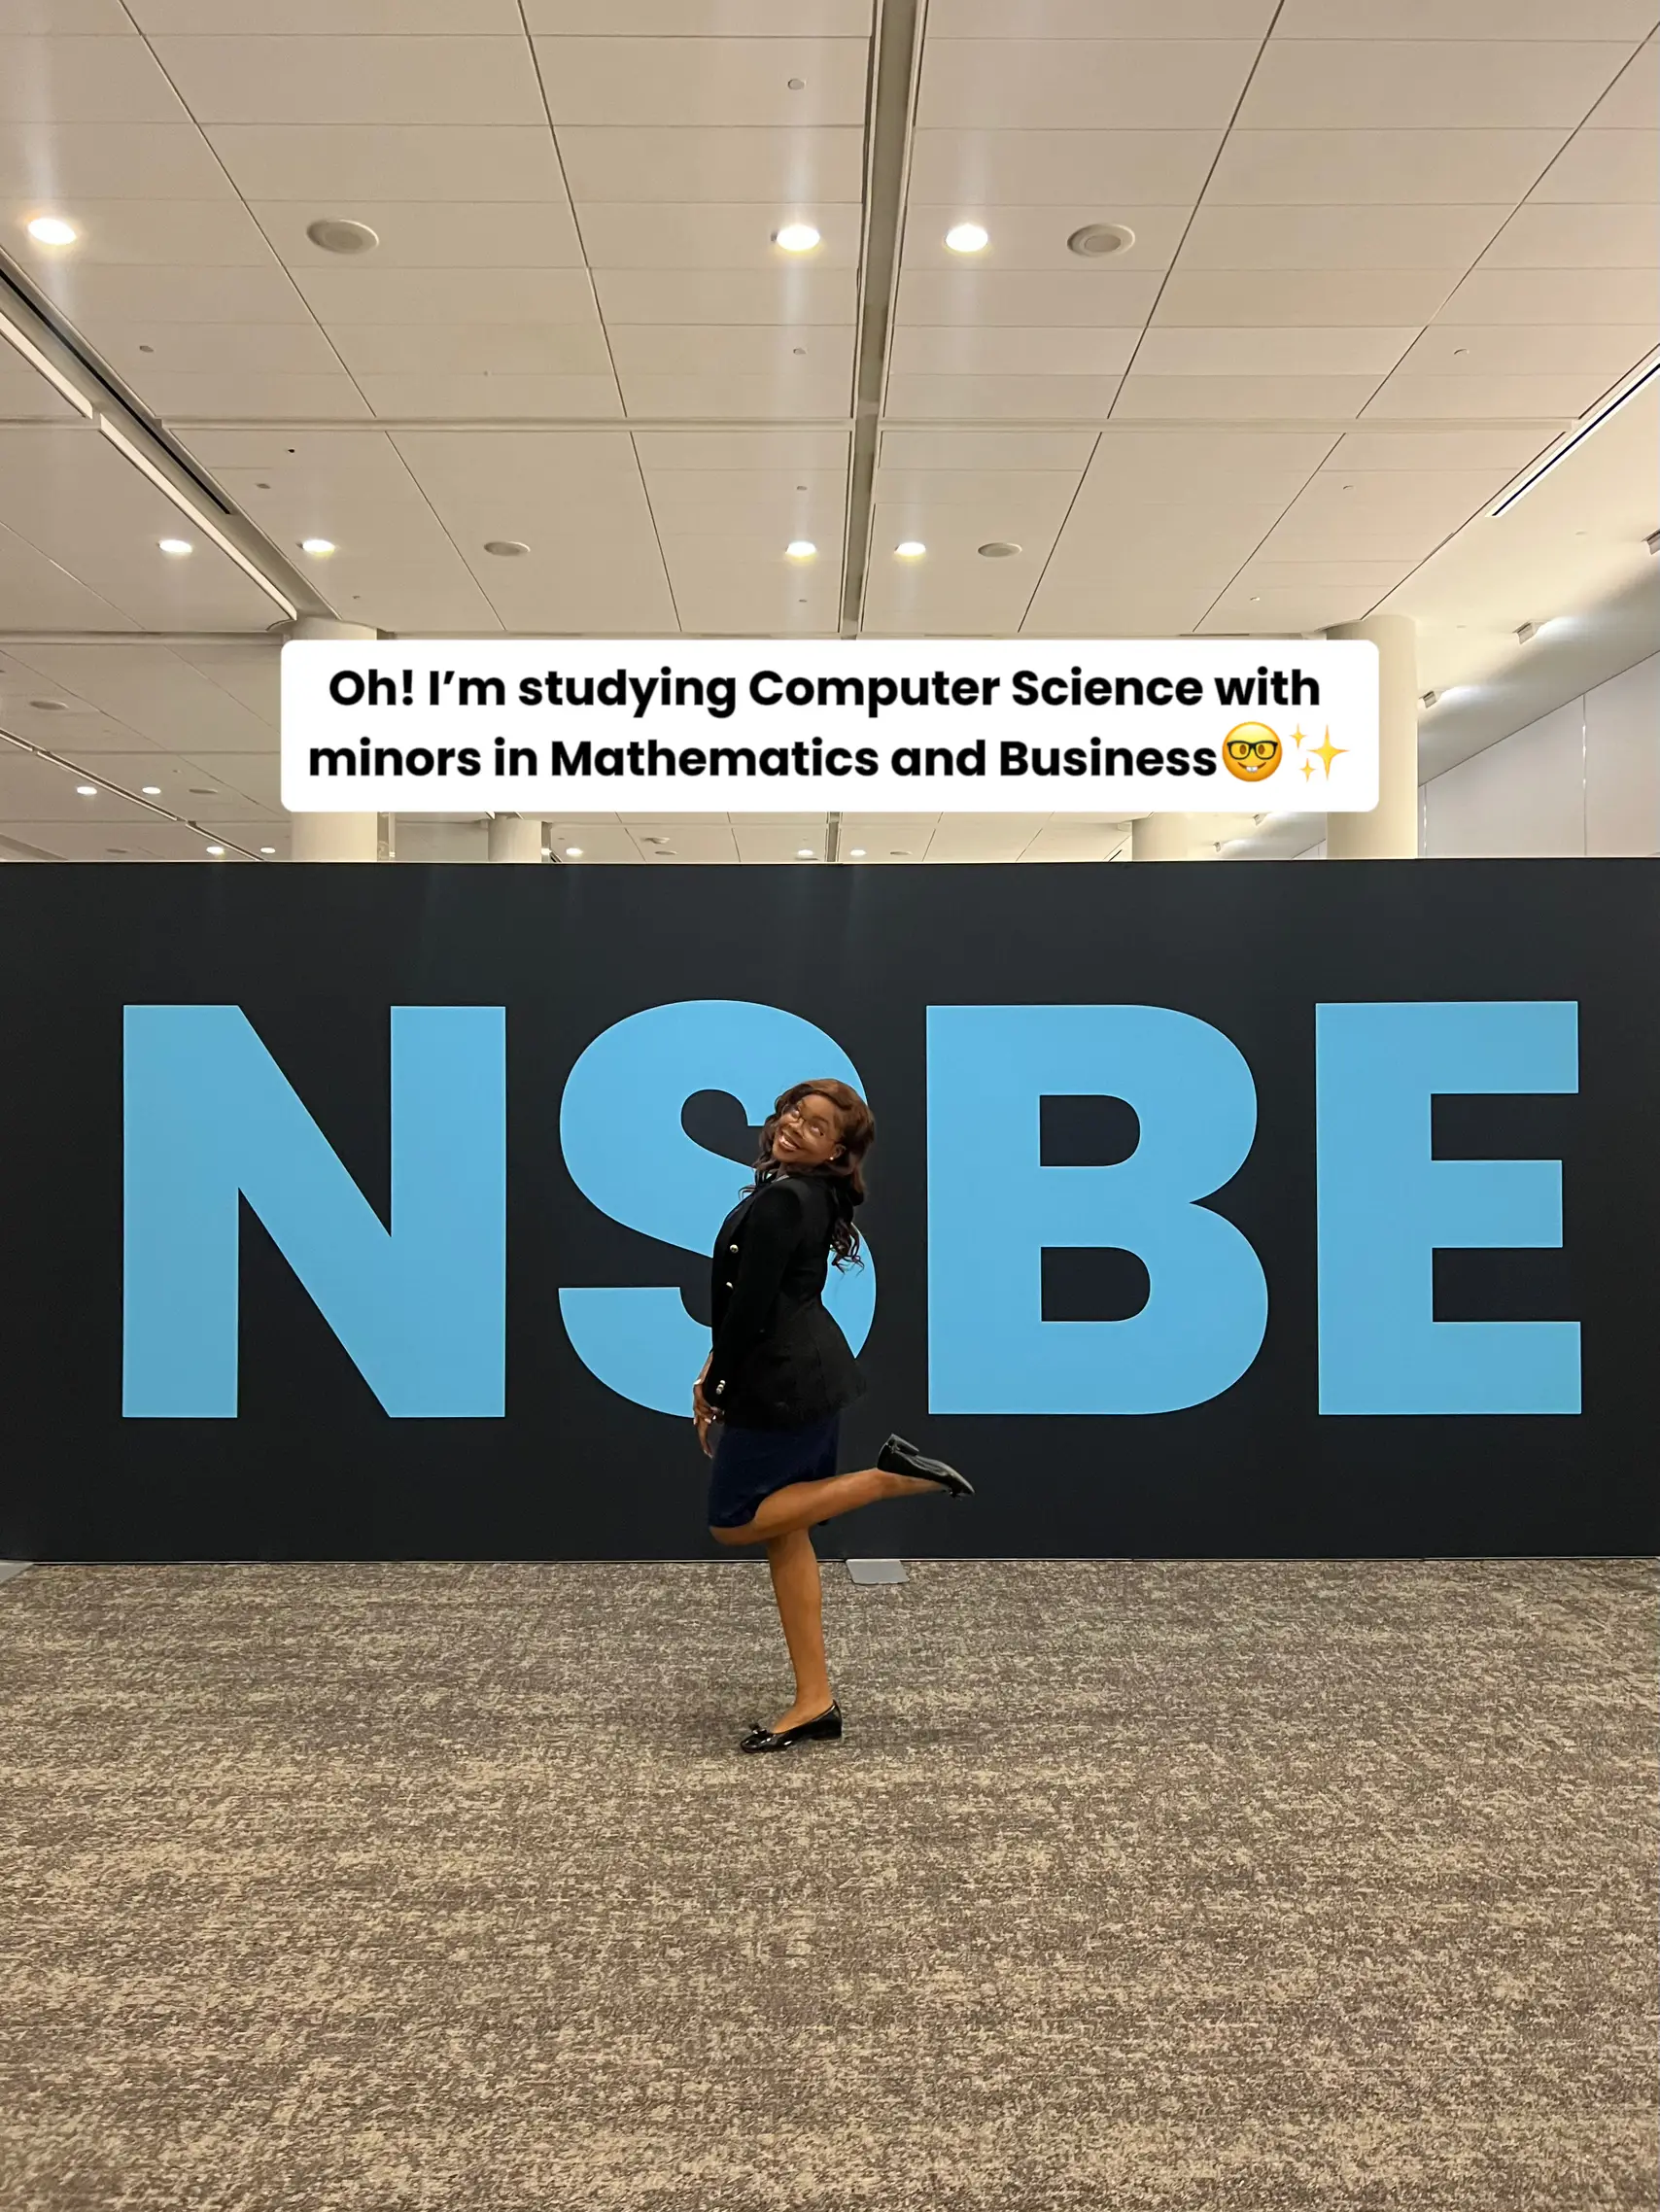  A woman is standing in front of a large sign that says "NSBE". She is wearing a black jacket and is smiling.